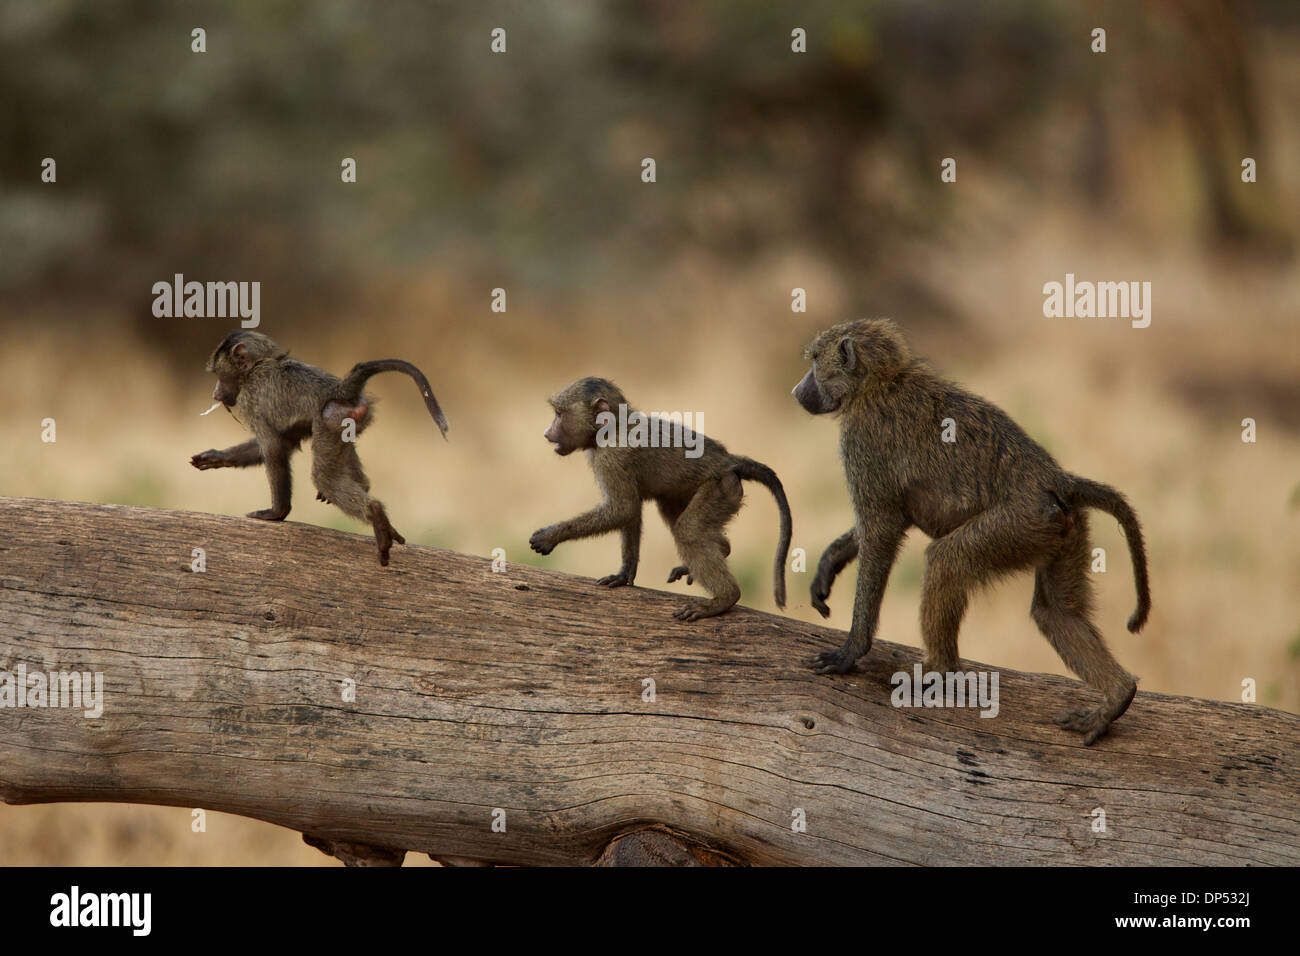 A family of baboons play on a log, Lewa Conservancy, Kenya Stock Photo